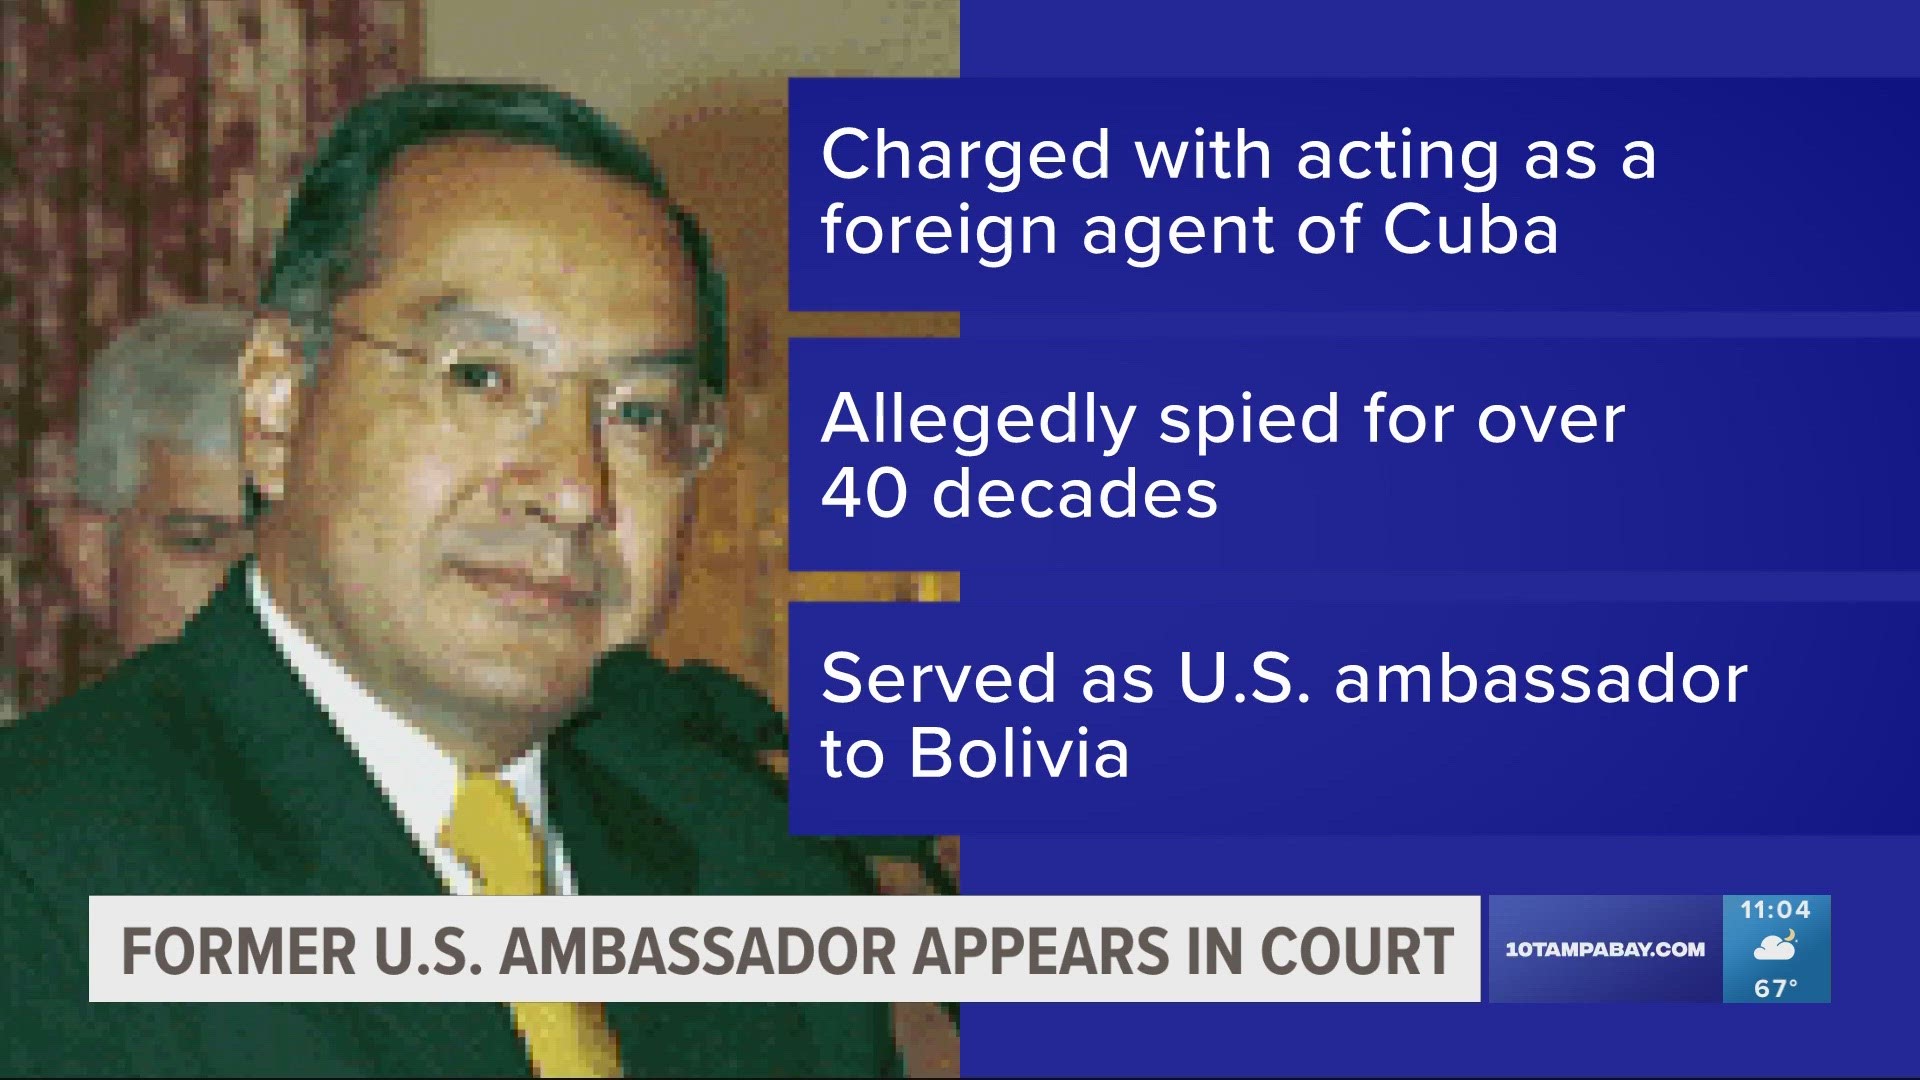 Newly unsealed court papers allege that Manuel Rocha engaged in “clandestine activity” on Cuba's behalf since at least 1981.